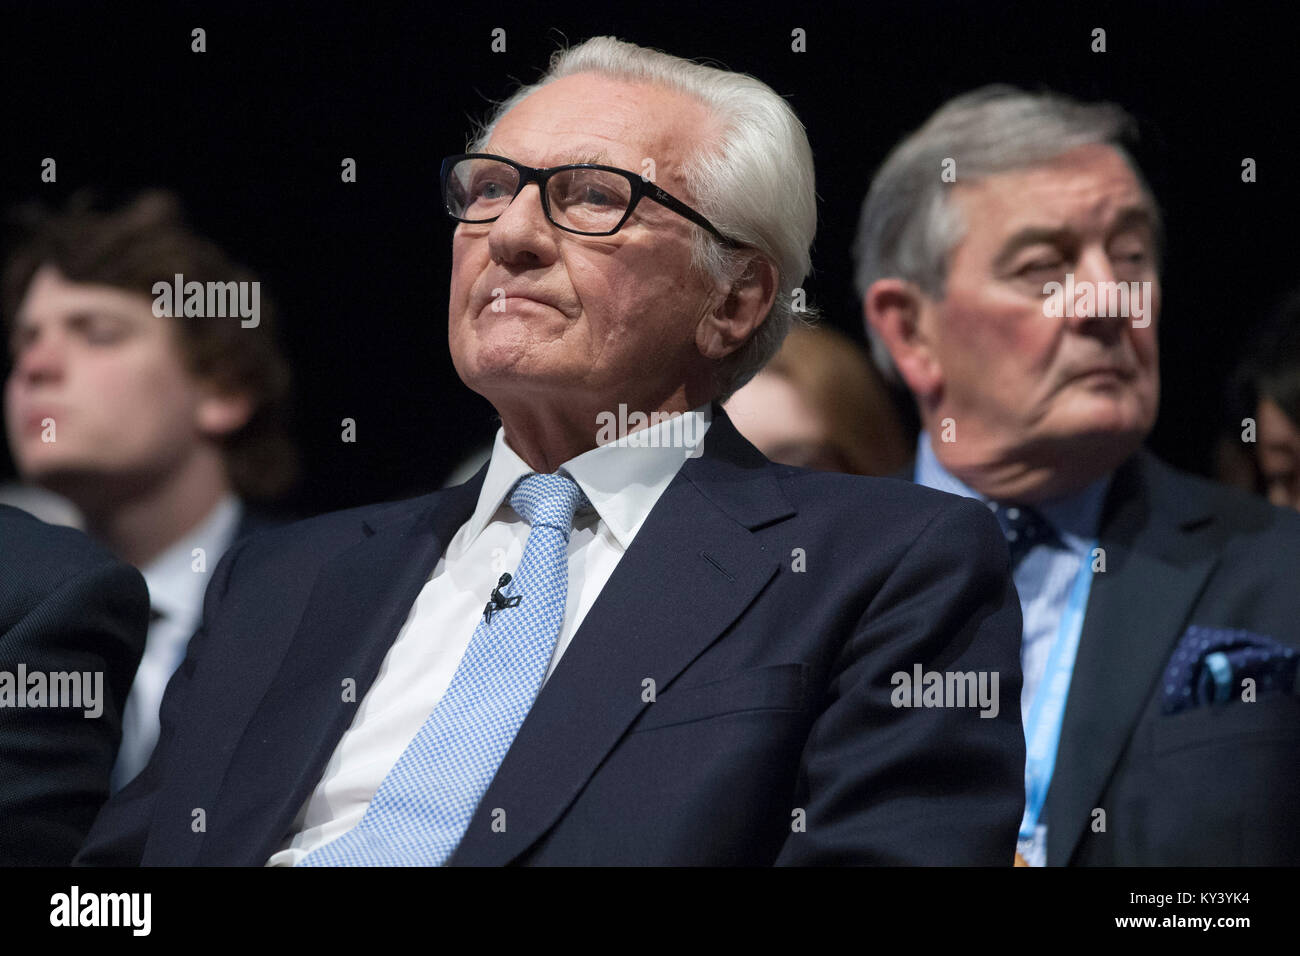 The 2015 Conservative Party annual conference in Manchester, England. Stock Photo